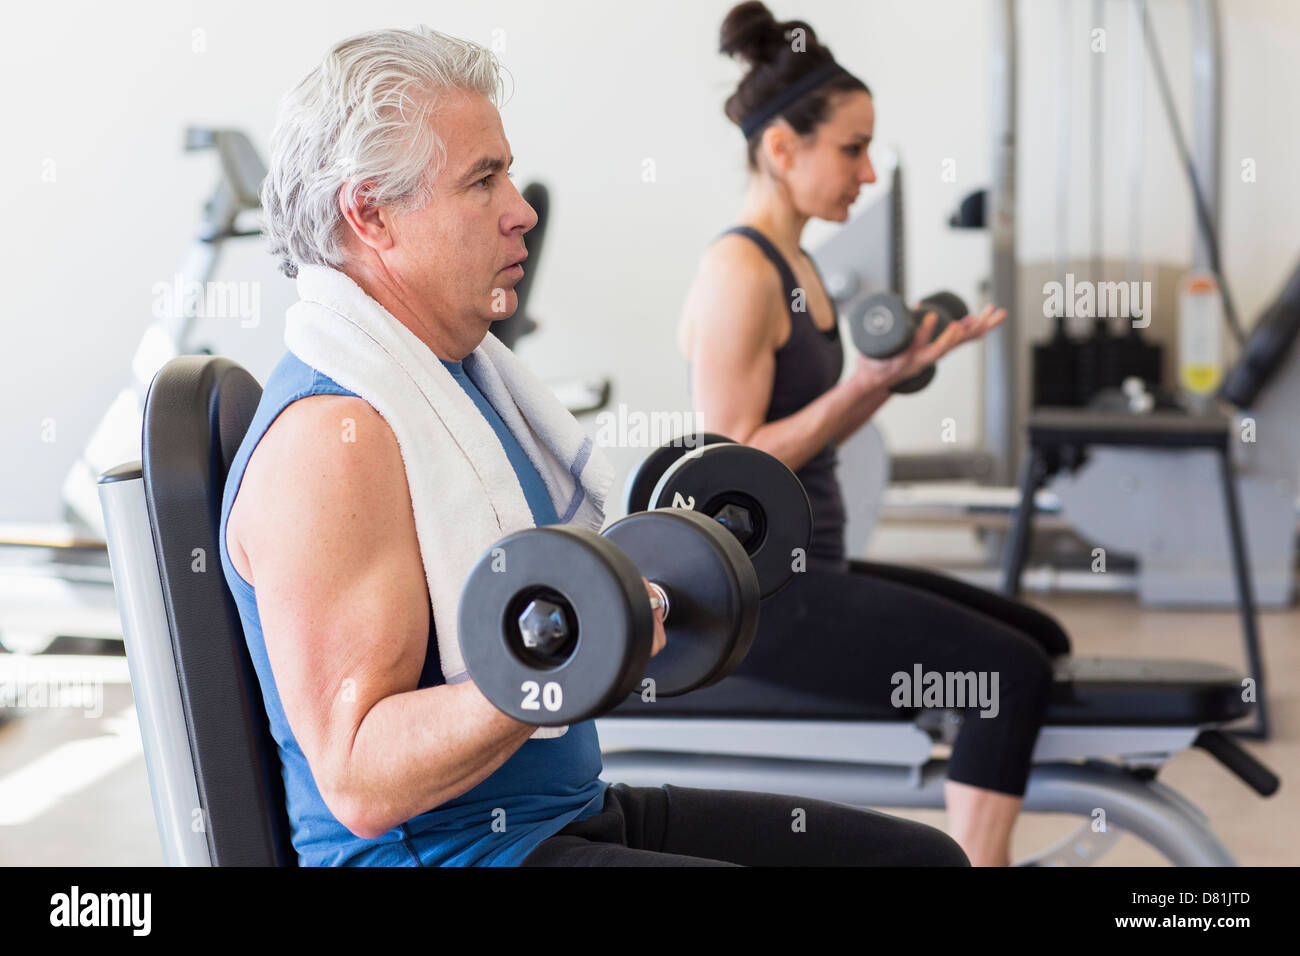 Older Hispanic man lifting weights in gym Banque D'Images